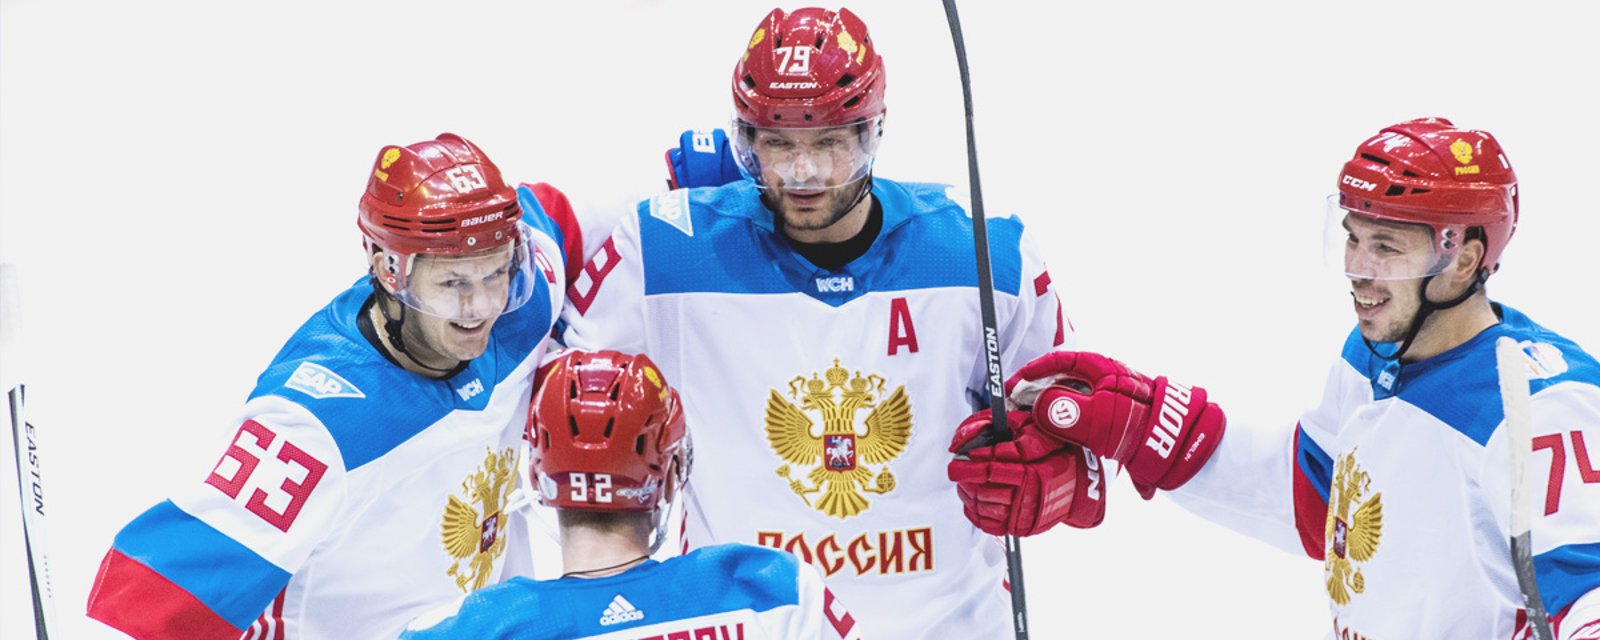 3 top KHL players that are possibly moving to the NHL.